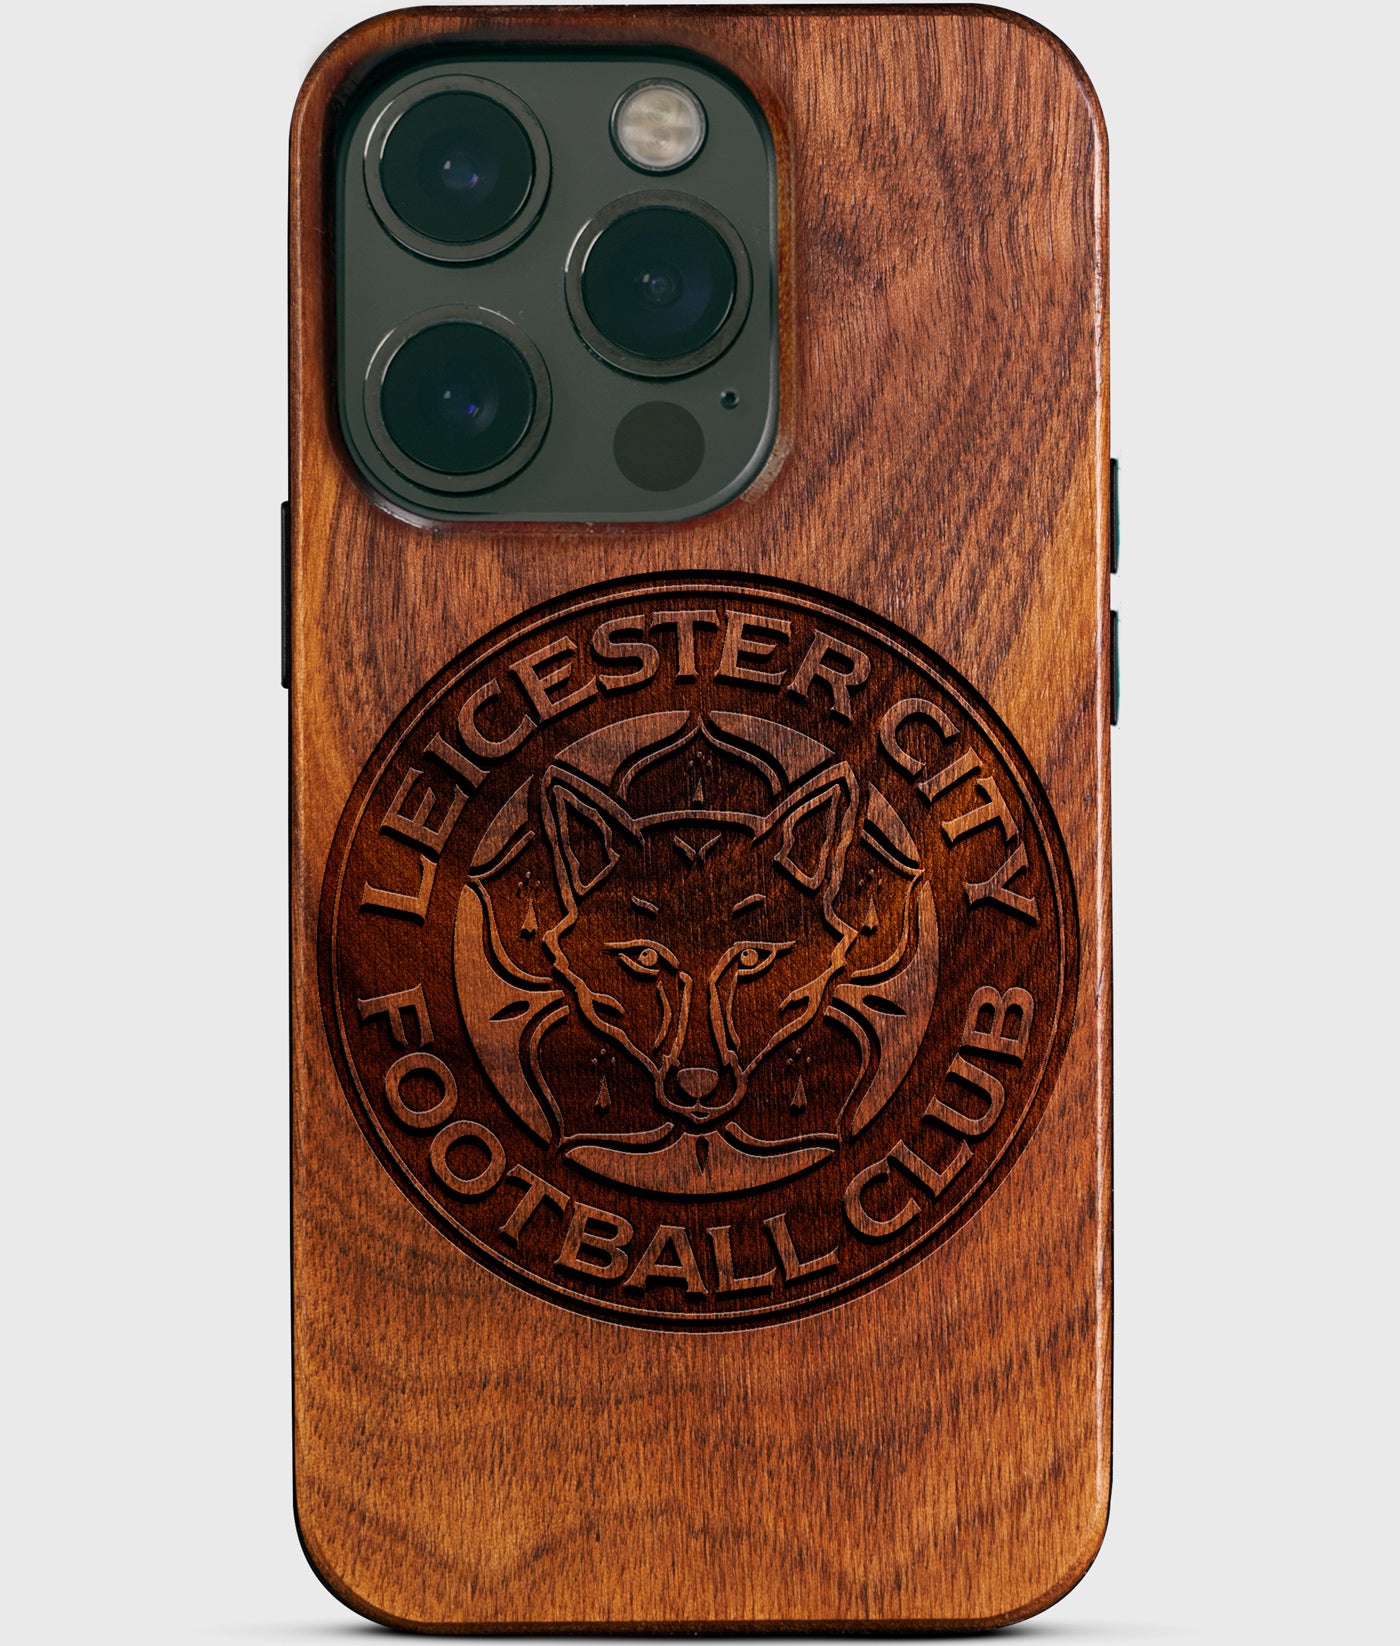 Custom Leicester City FC iPhone 14 Pro Cases - Leicester City FC Personalized iPhone 14 Pro Cover - England Football Club Leicester City FC Gifts For Men 2022 Best Leicester City FC Christmas Gifts Wood Unique Leicester City FC Gift For Him Monogrammed